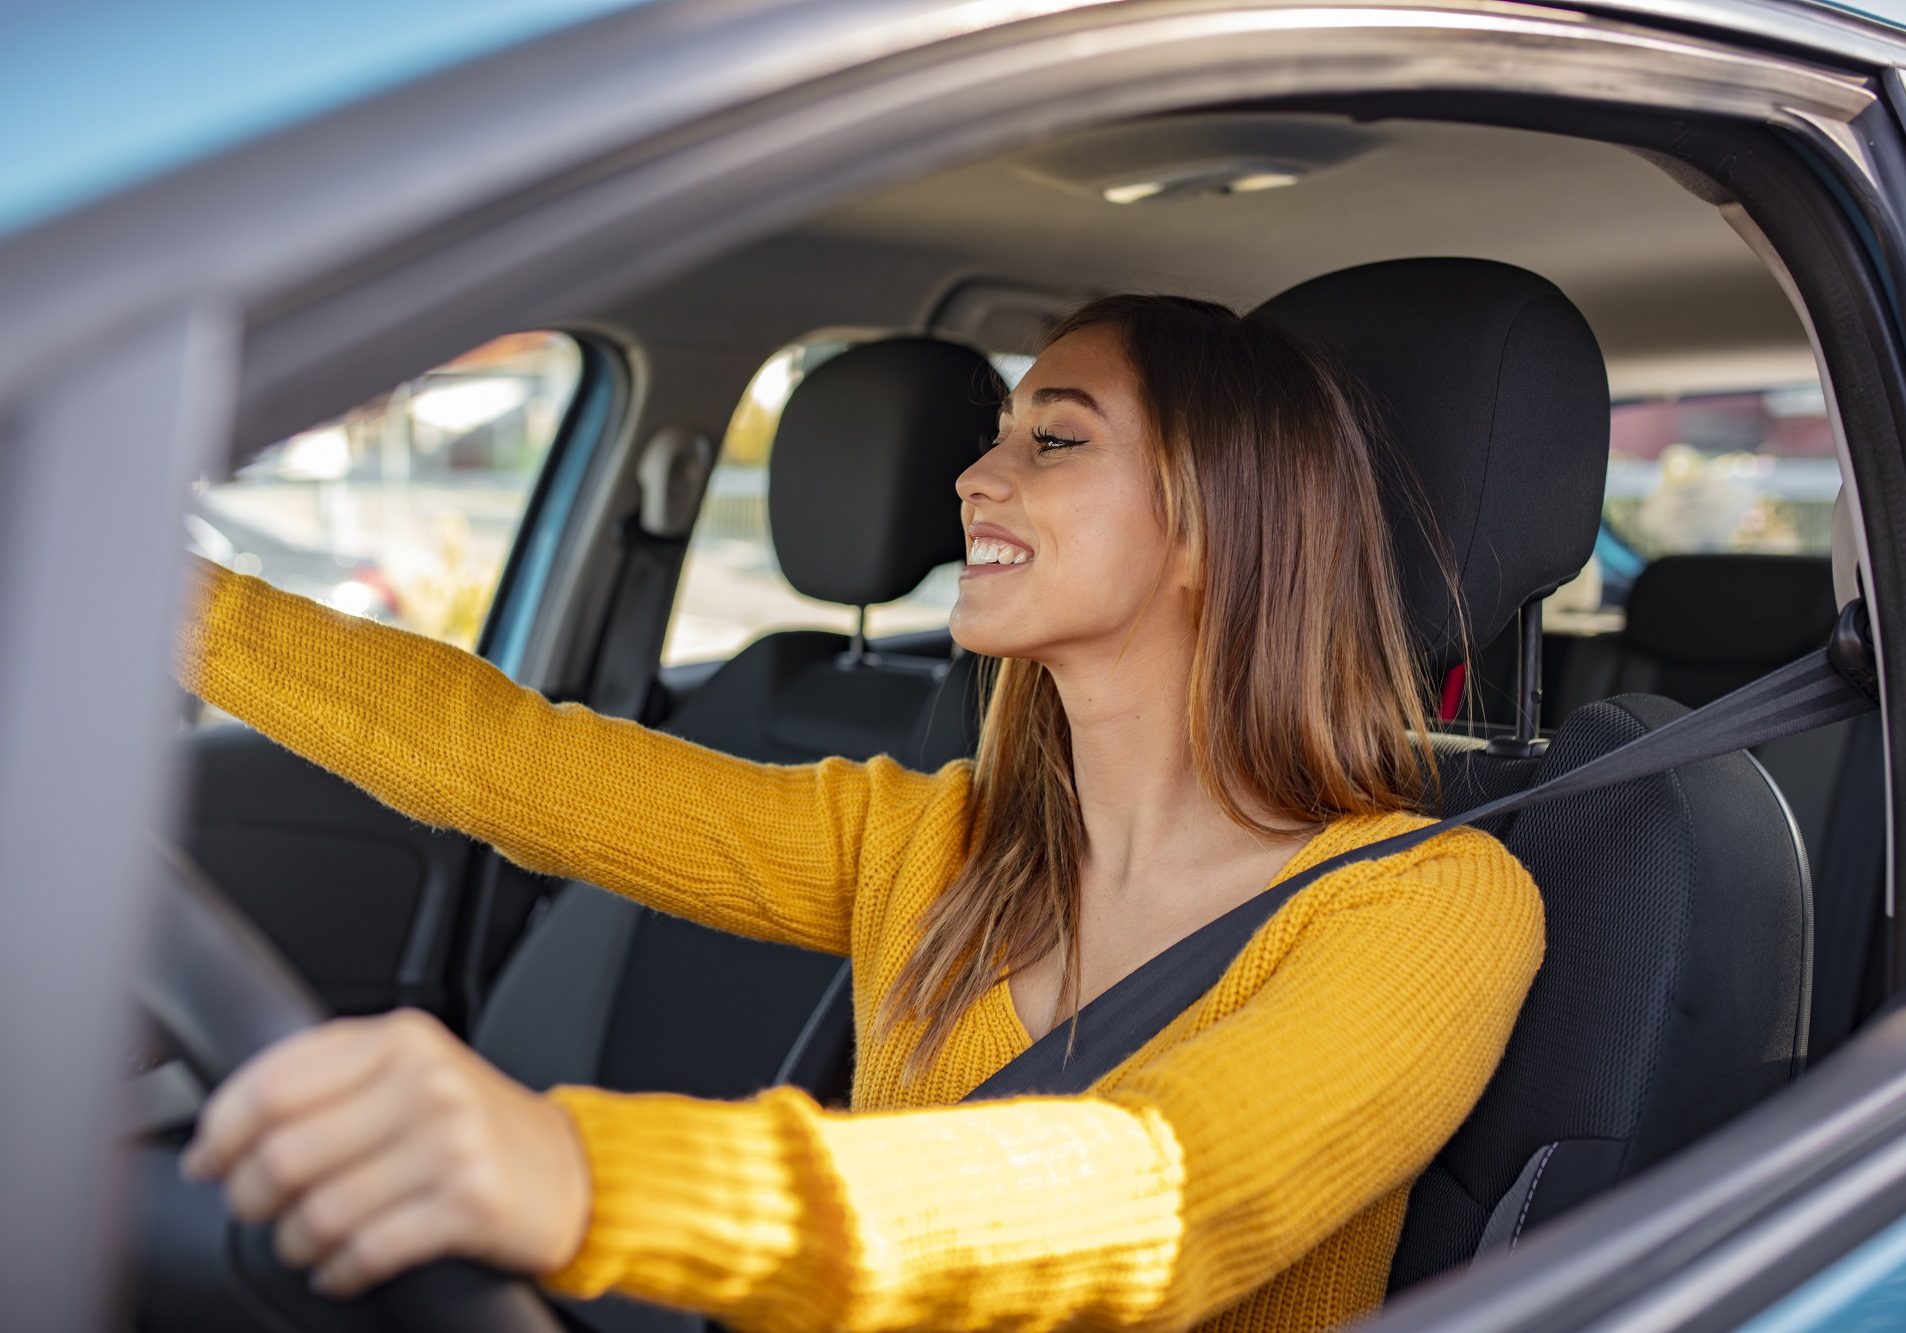 Beautiful female Driver adjusting the Rear Mirror looking at herself. Adjusting the rear view mirror. Woman adjusts the rear view mirror with her hand. Happy young woman driver looking adjusting rear view car mirror